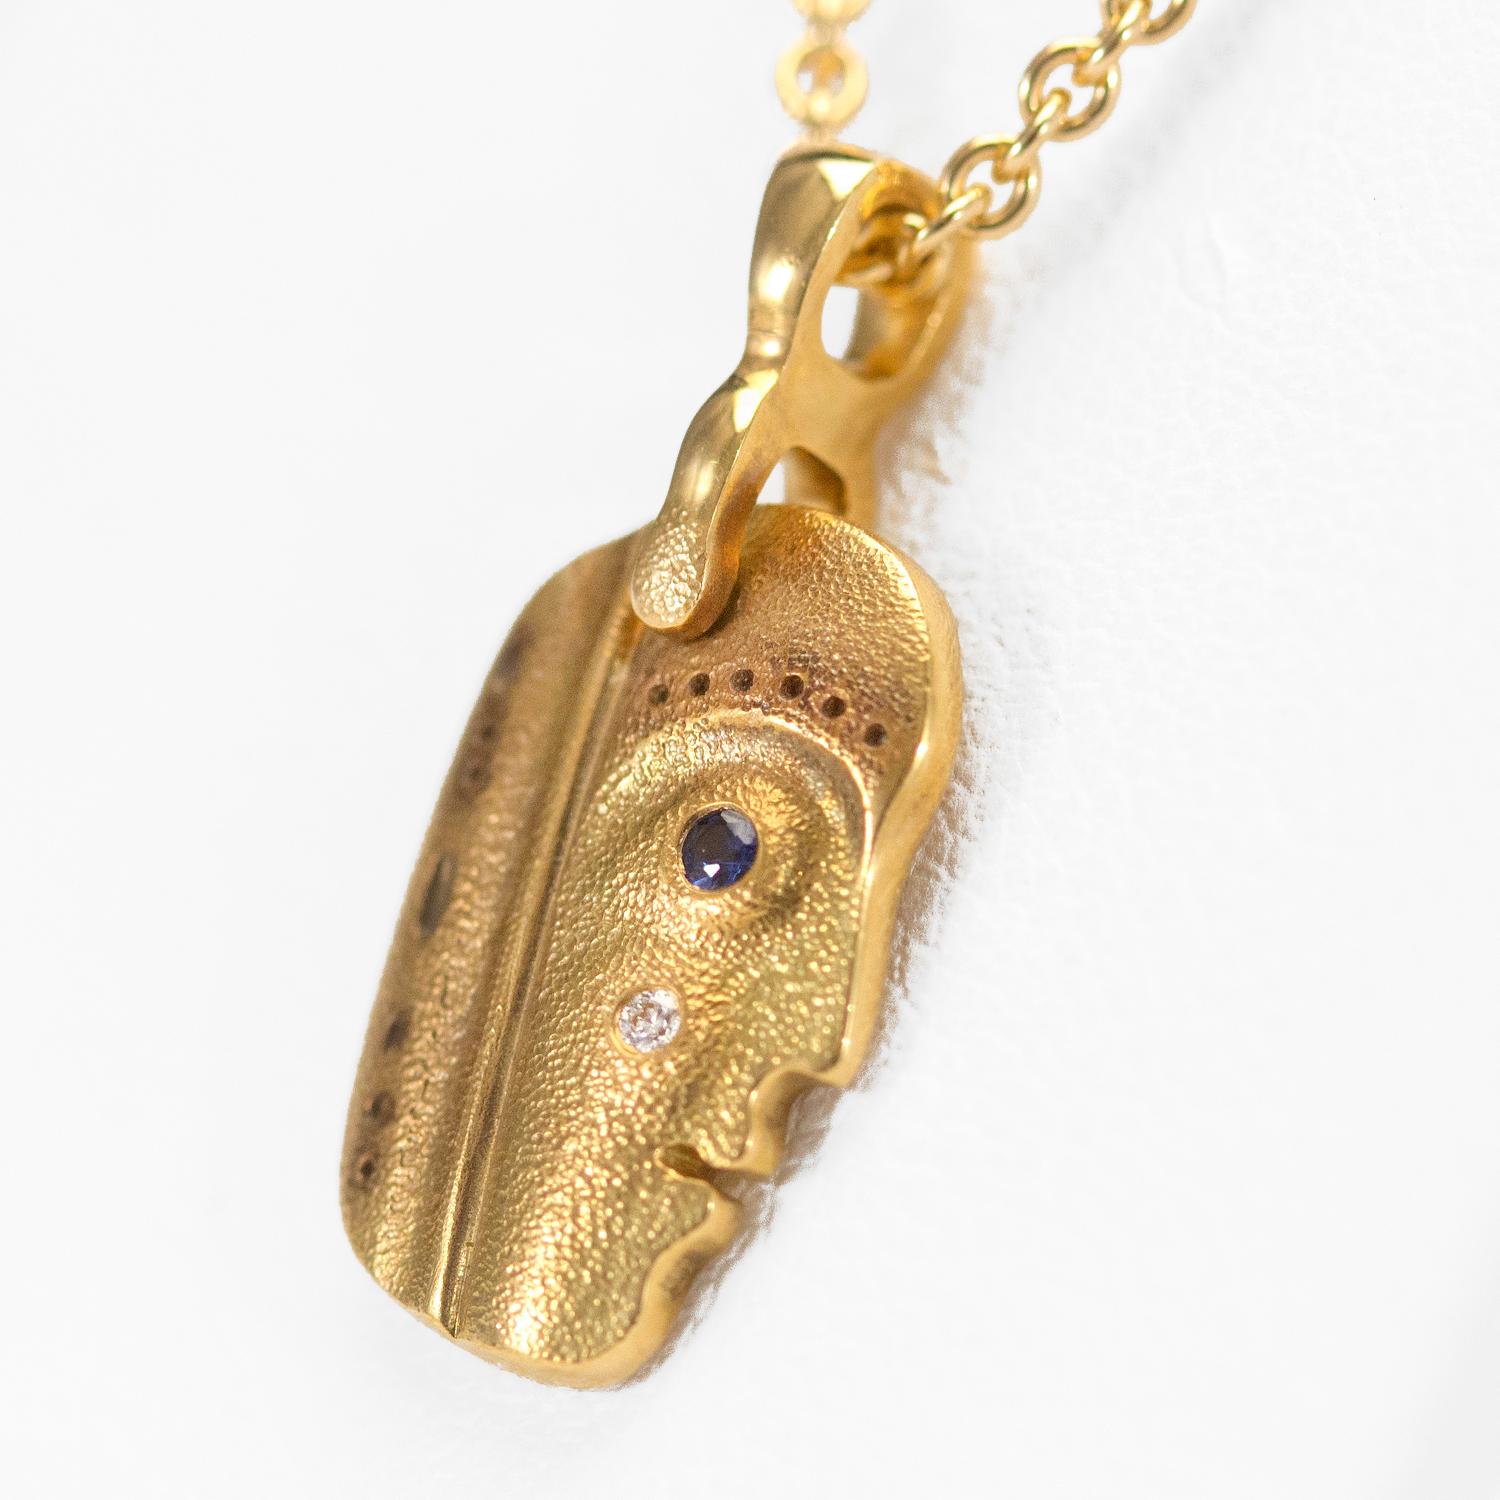 From the studio of Alex Sepkus in New York - 18 karat hand-hammered yellow gold 